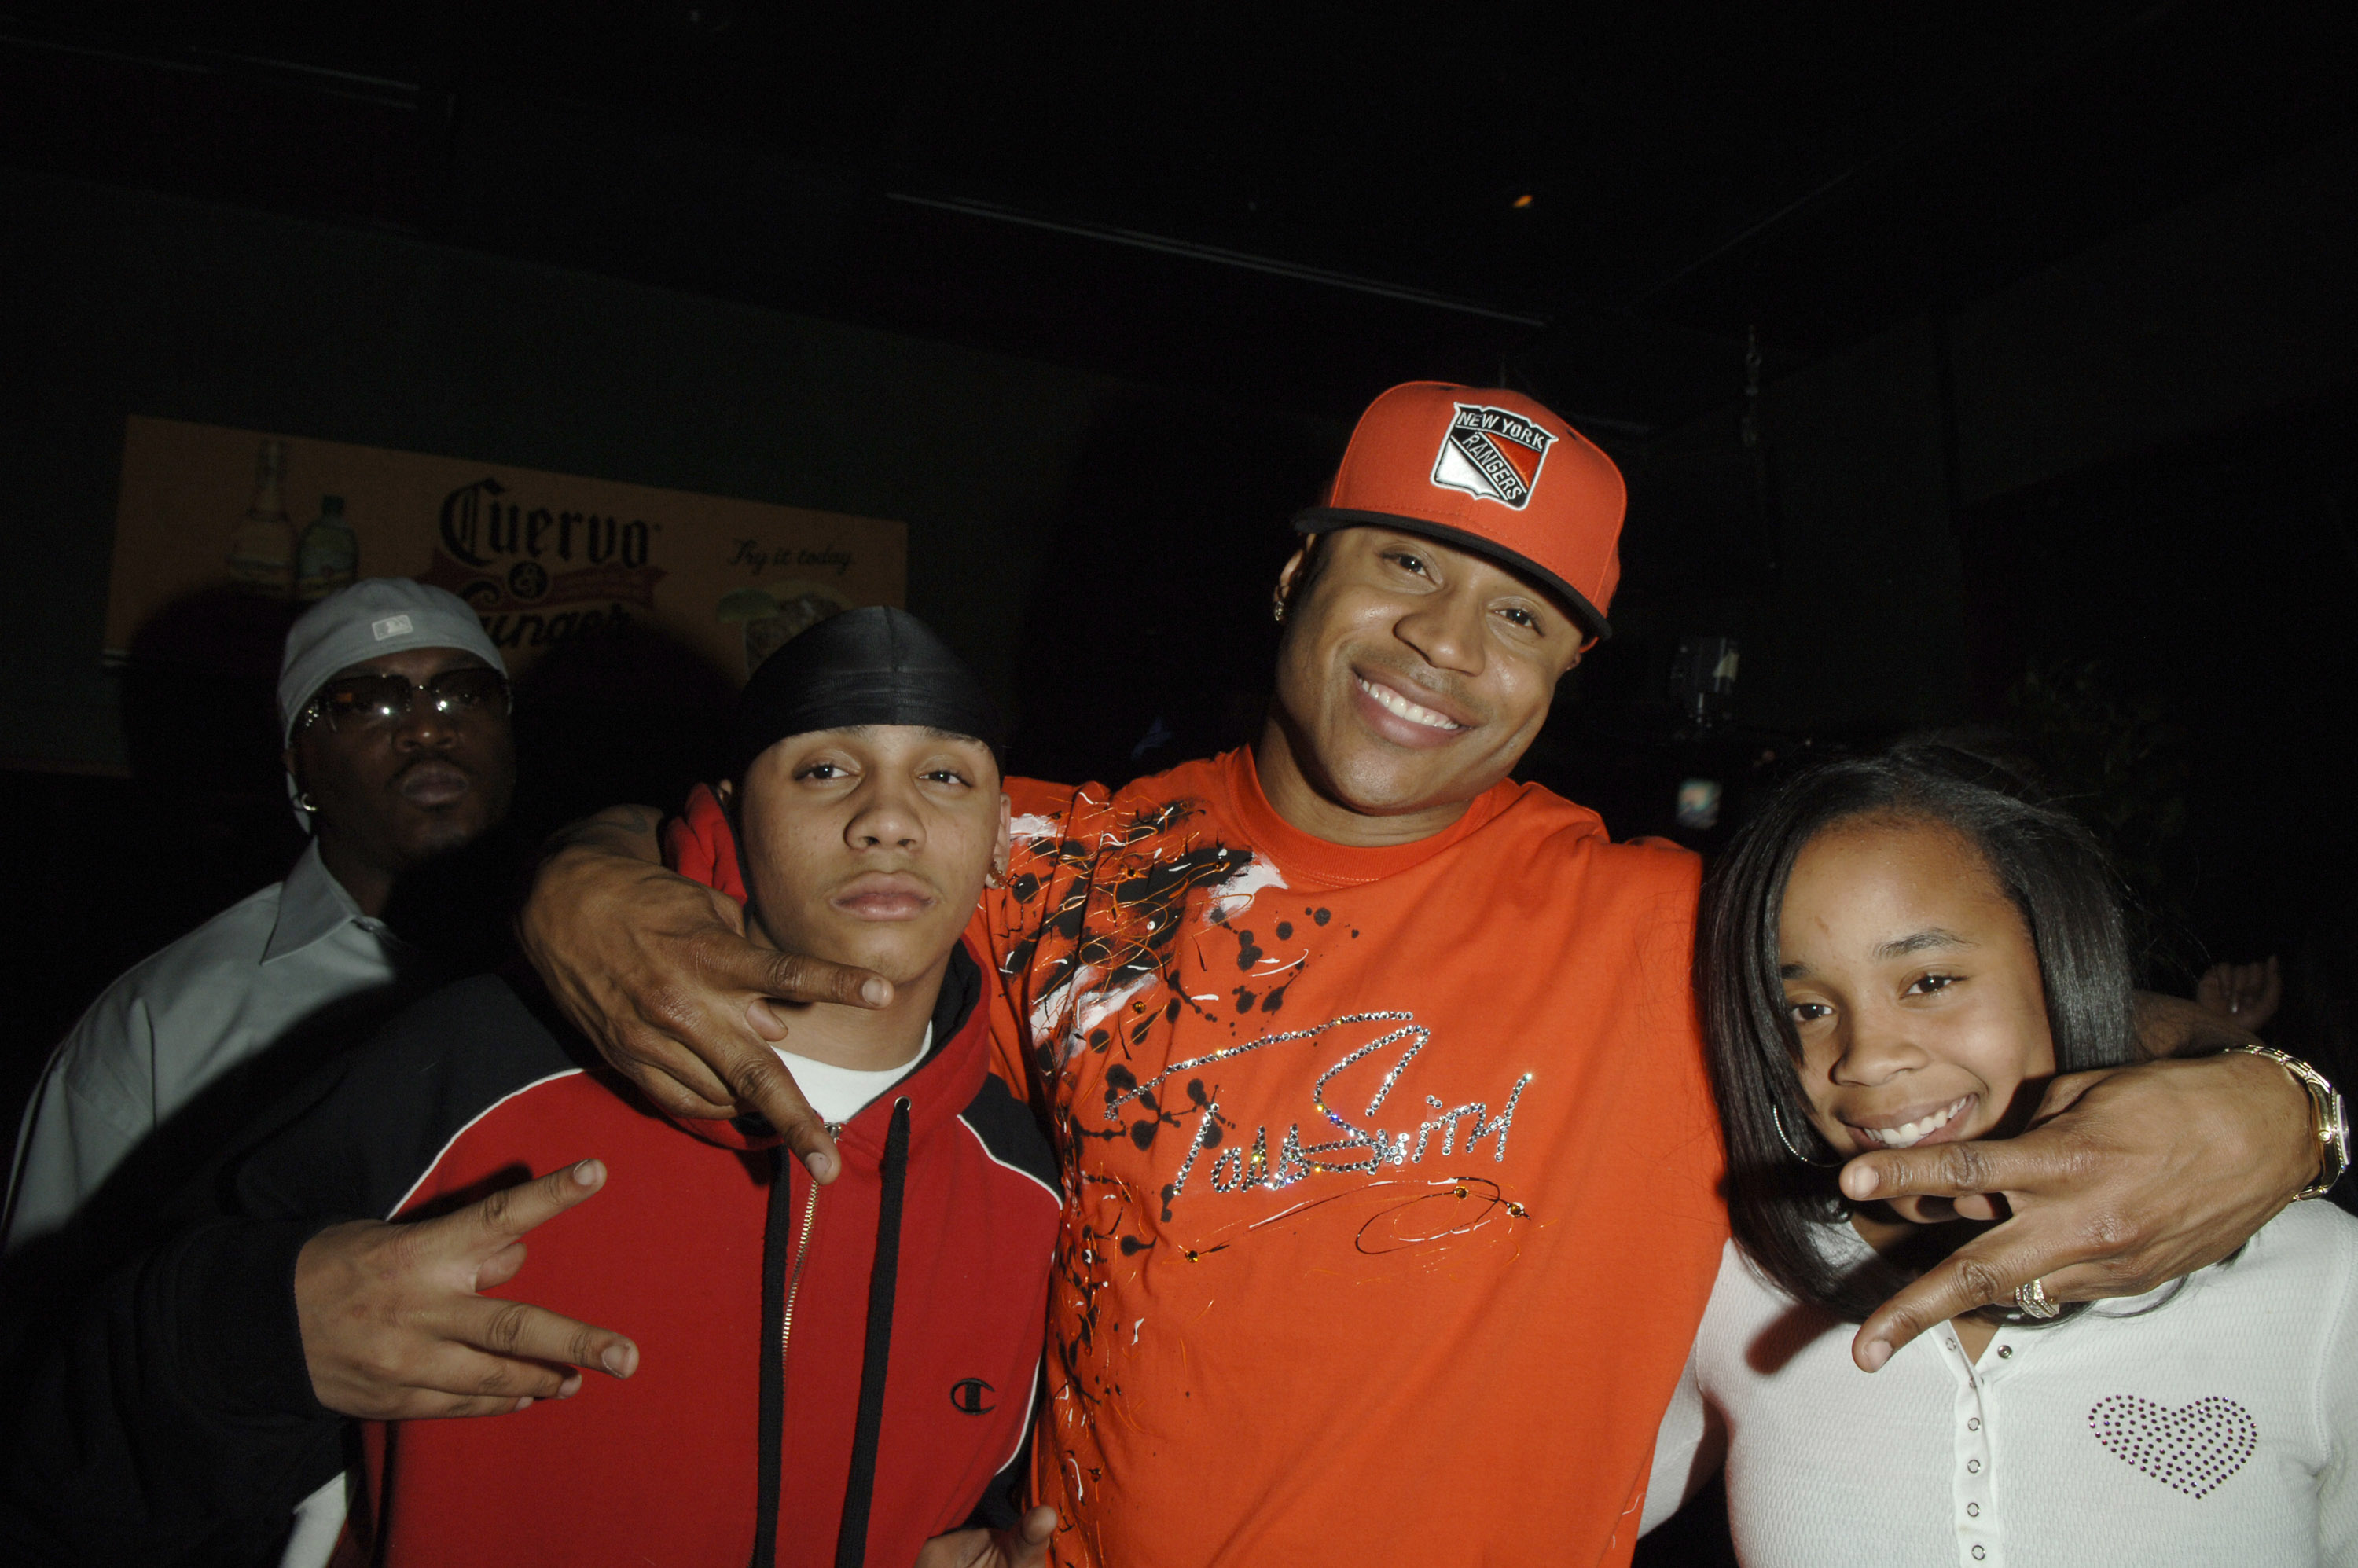 Nagee Smith, LL Cool J and Natalia Smith during the rapper’s album release party on April 11, 2006, at Pink@ BLVD, in New York City, New York. | Source Getty Images